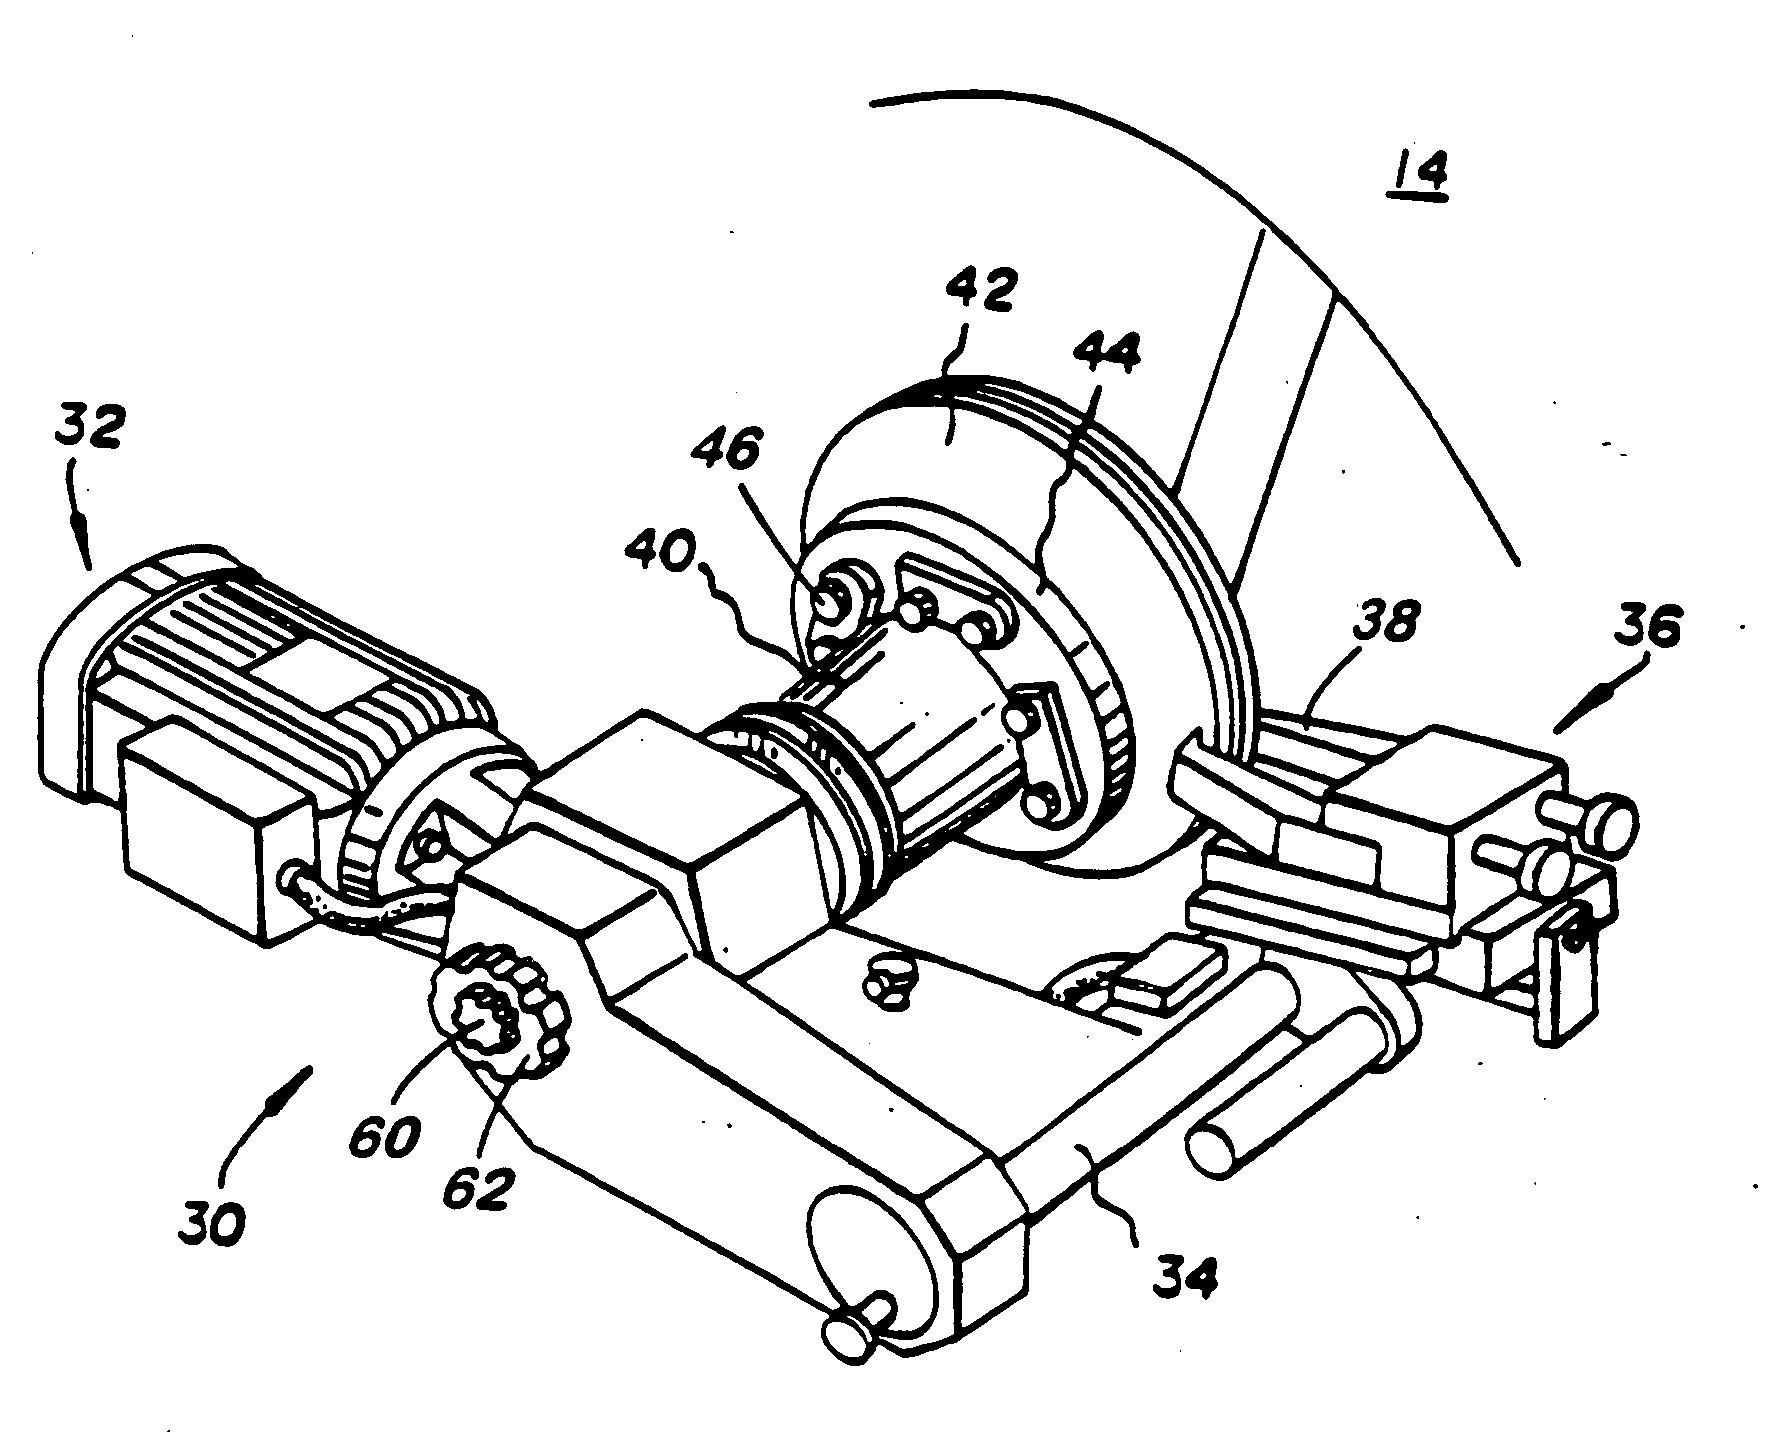 Apparatus and method for automatically compensating for lateral runout